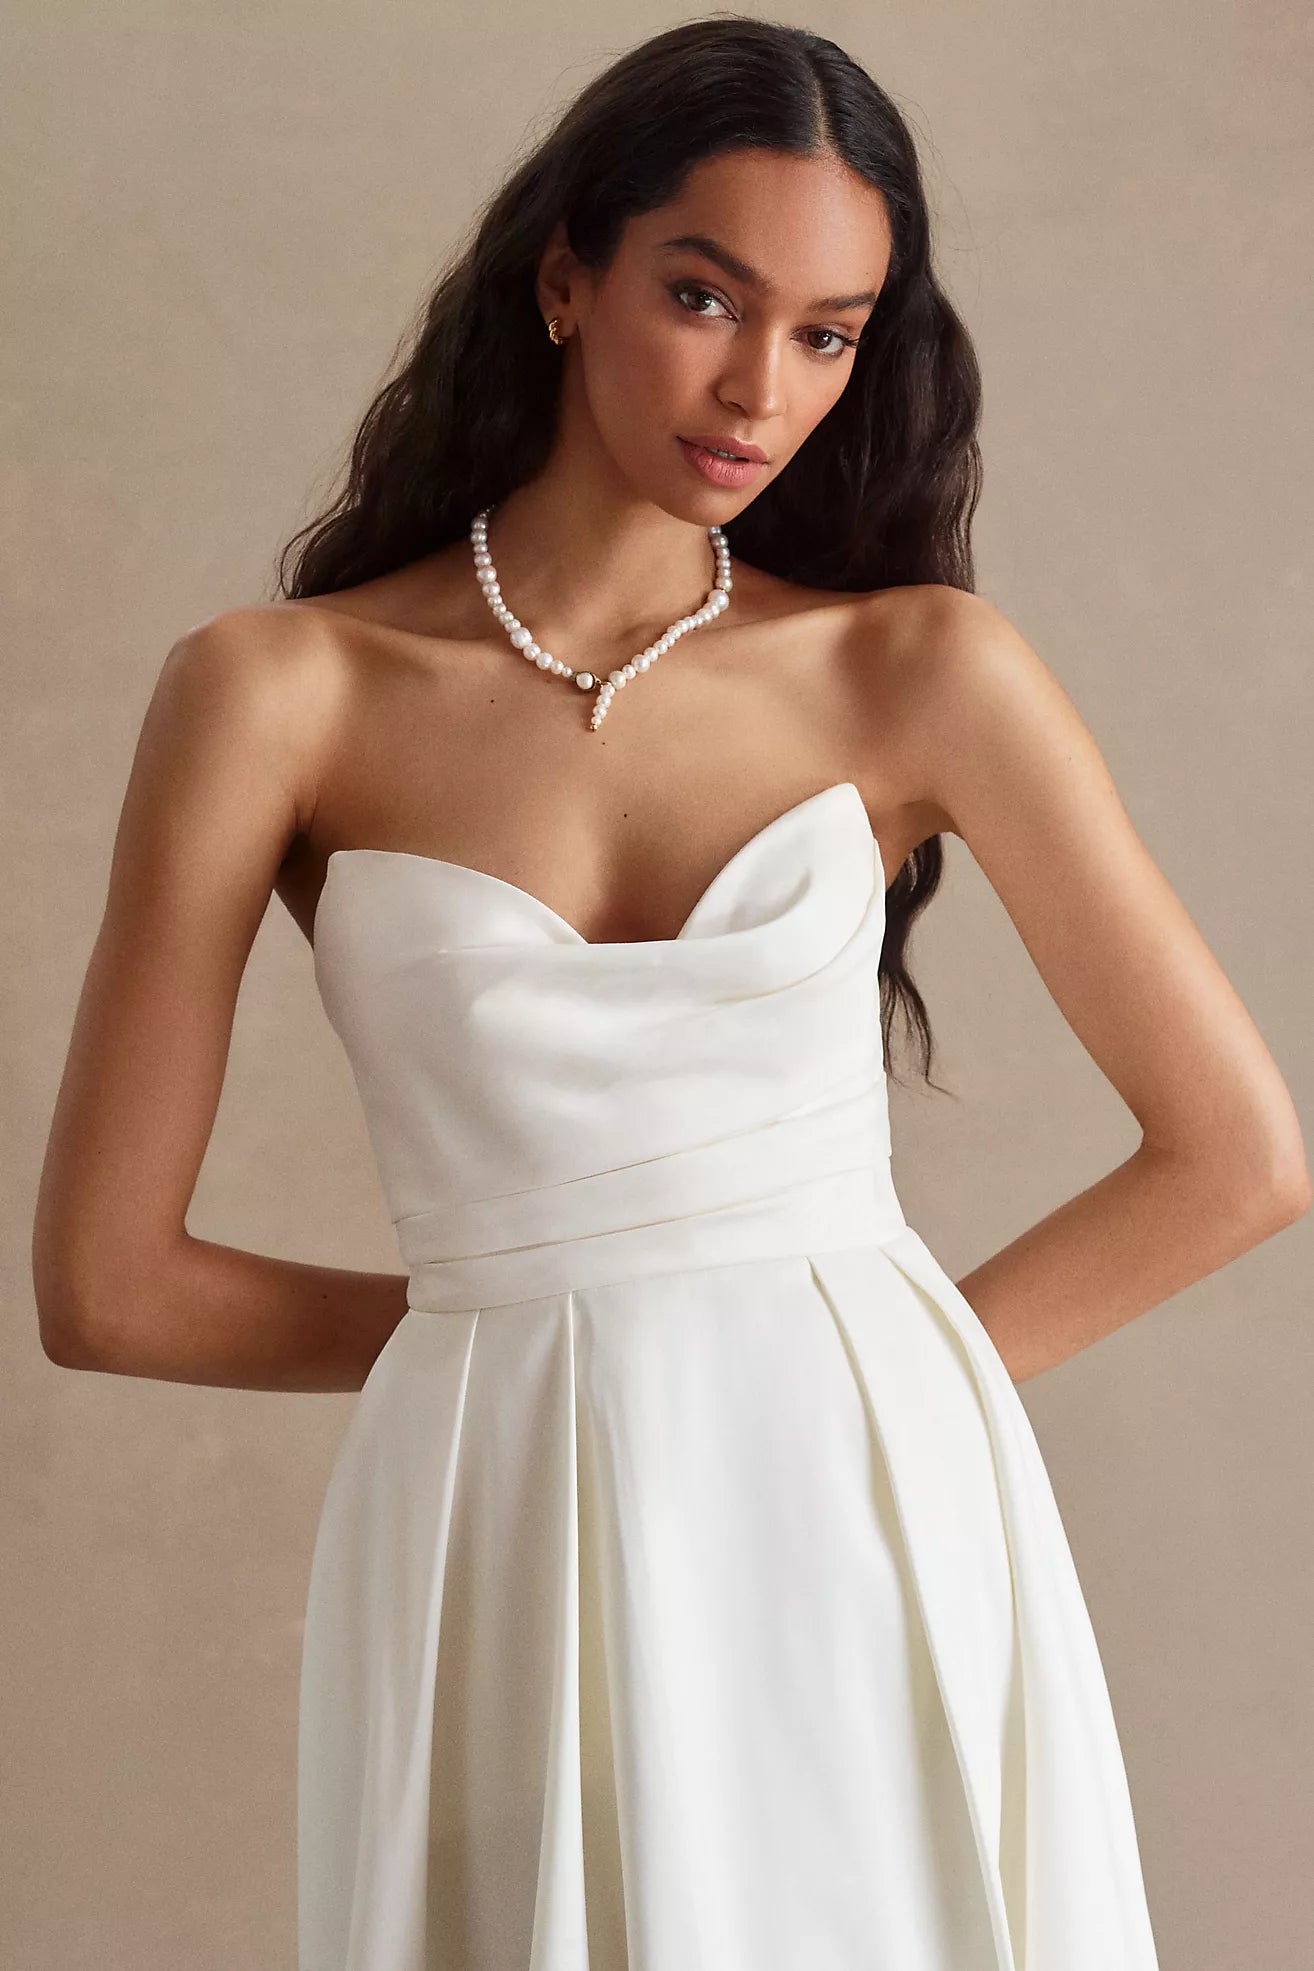 Wedding Dresses for Flat Chest: 10 Must Have Styles - Petite